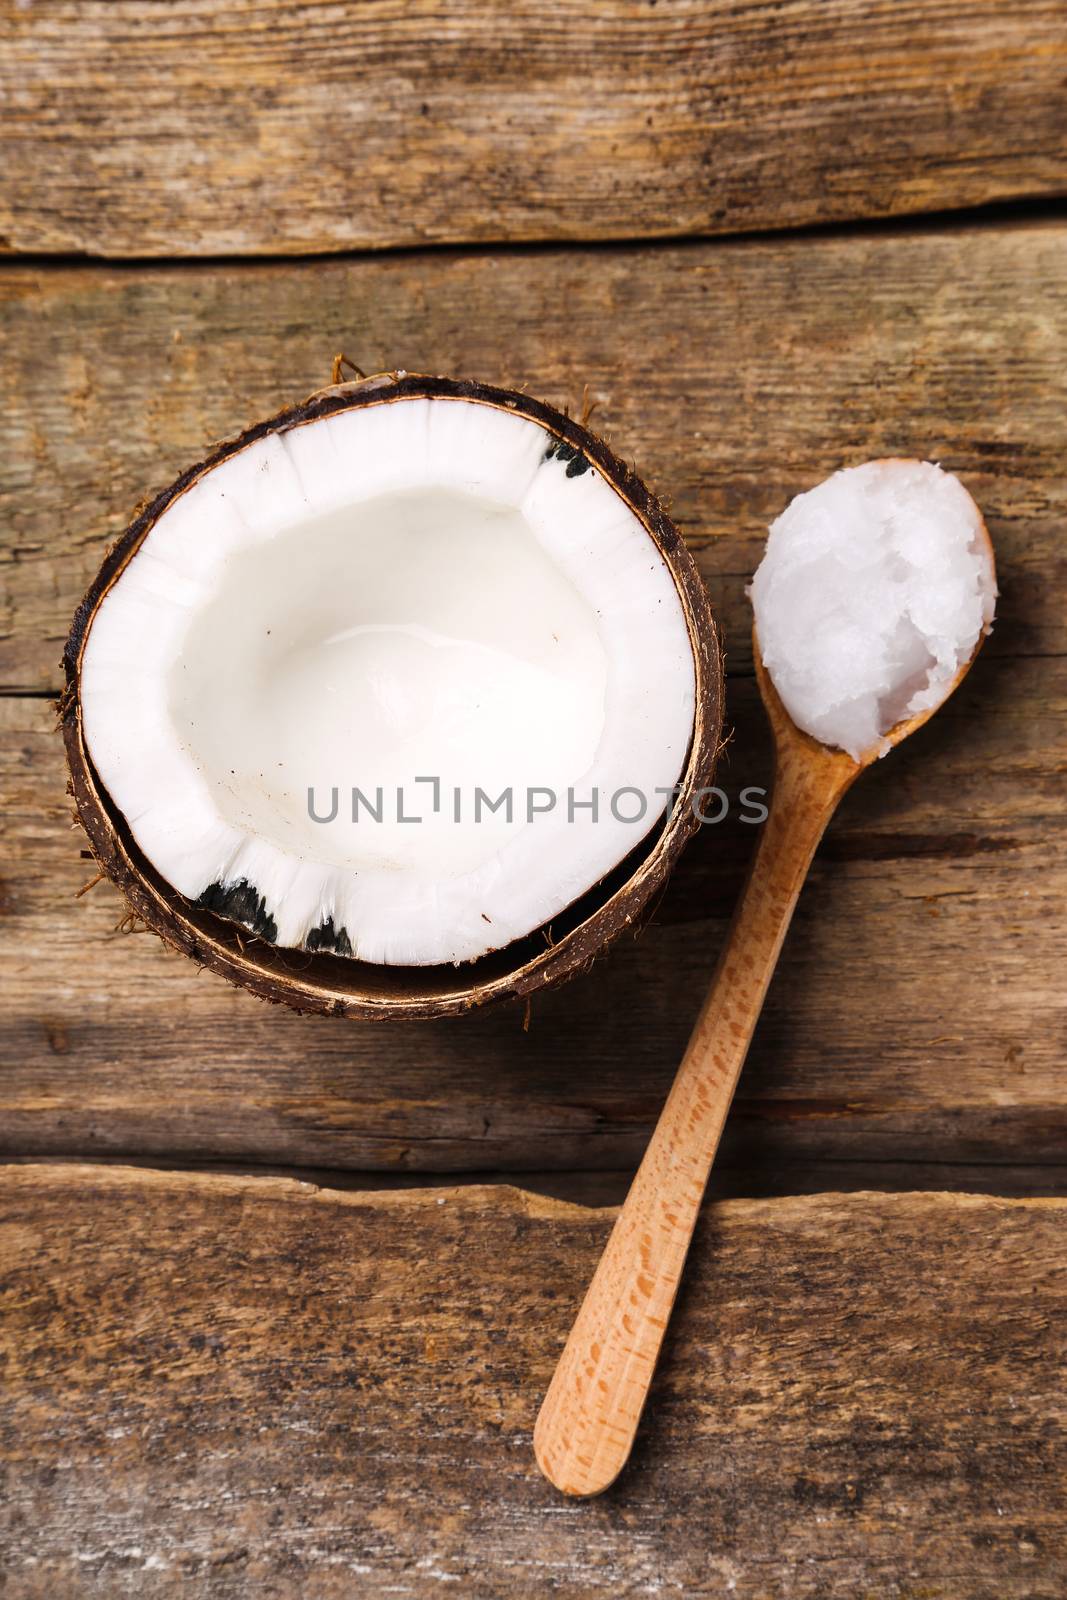 Coconut on the wooden table